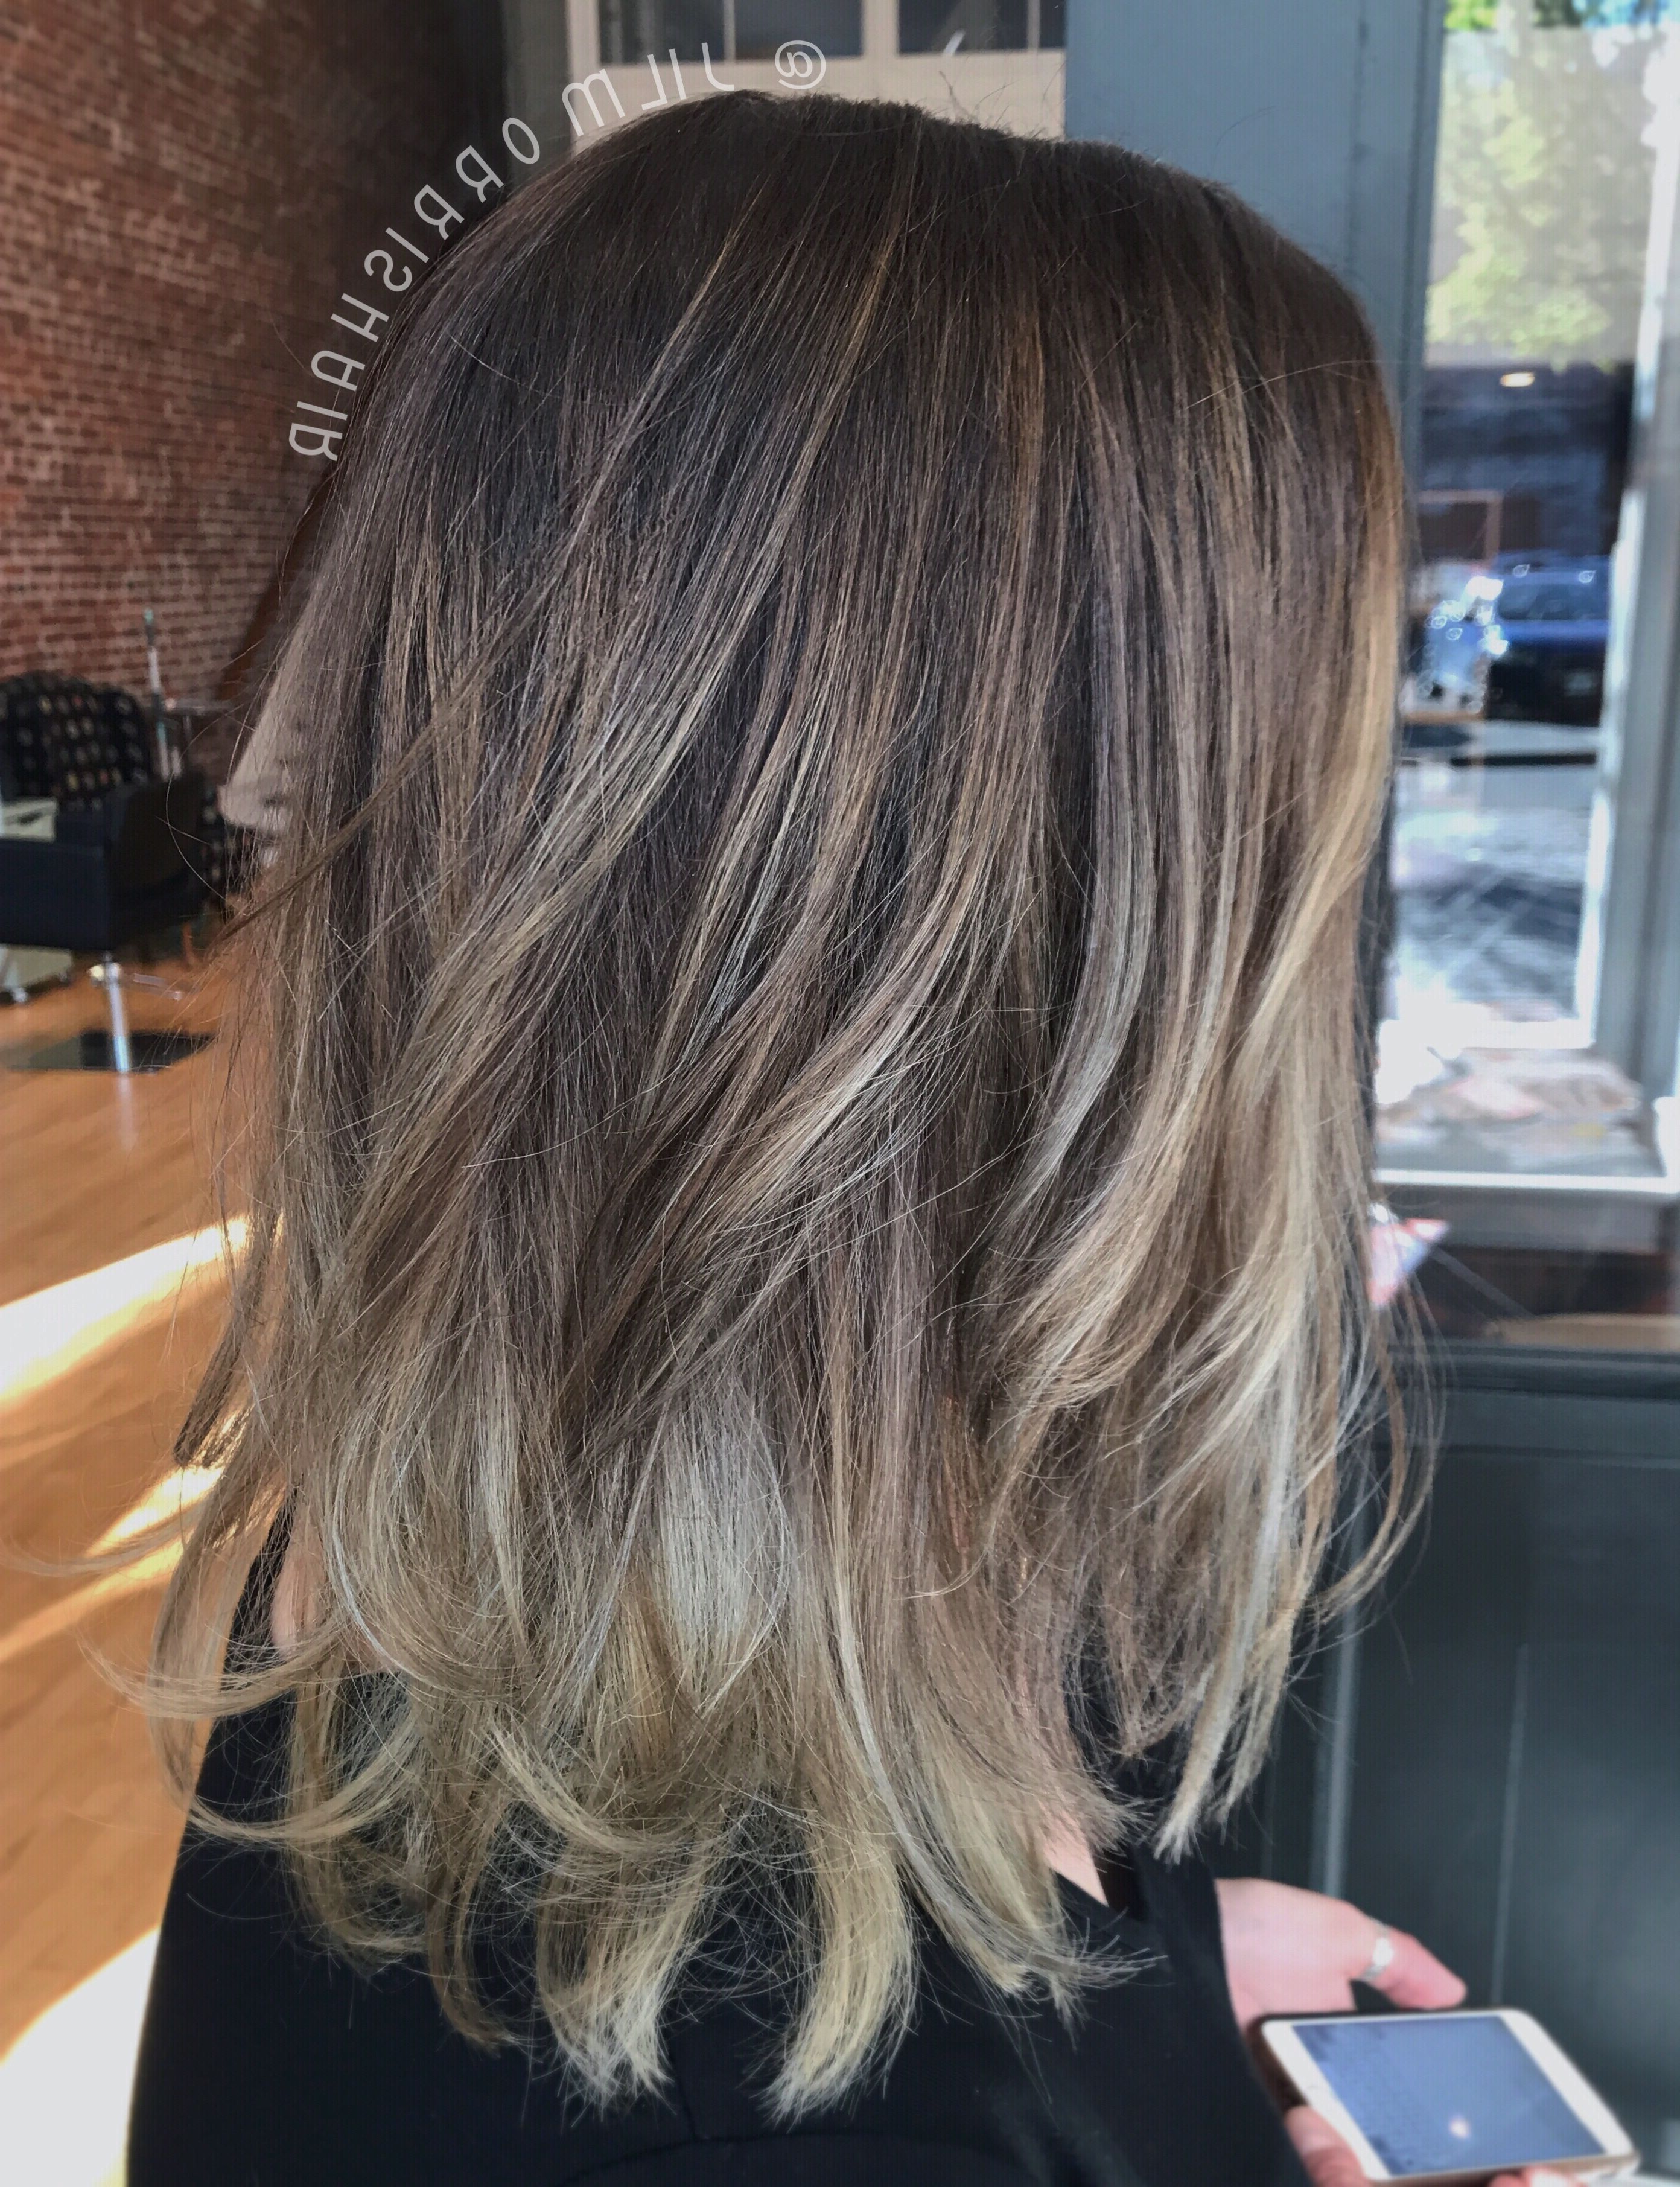 Dark Ash Blonde Sombré, Balayage Highlights With Rooty Lowlights Within Favorite Dark Locks Blonde Hairstyles With Caramel Highlights (View 1 of 20)